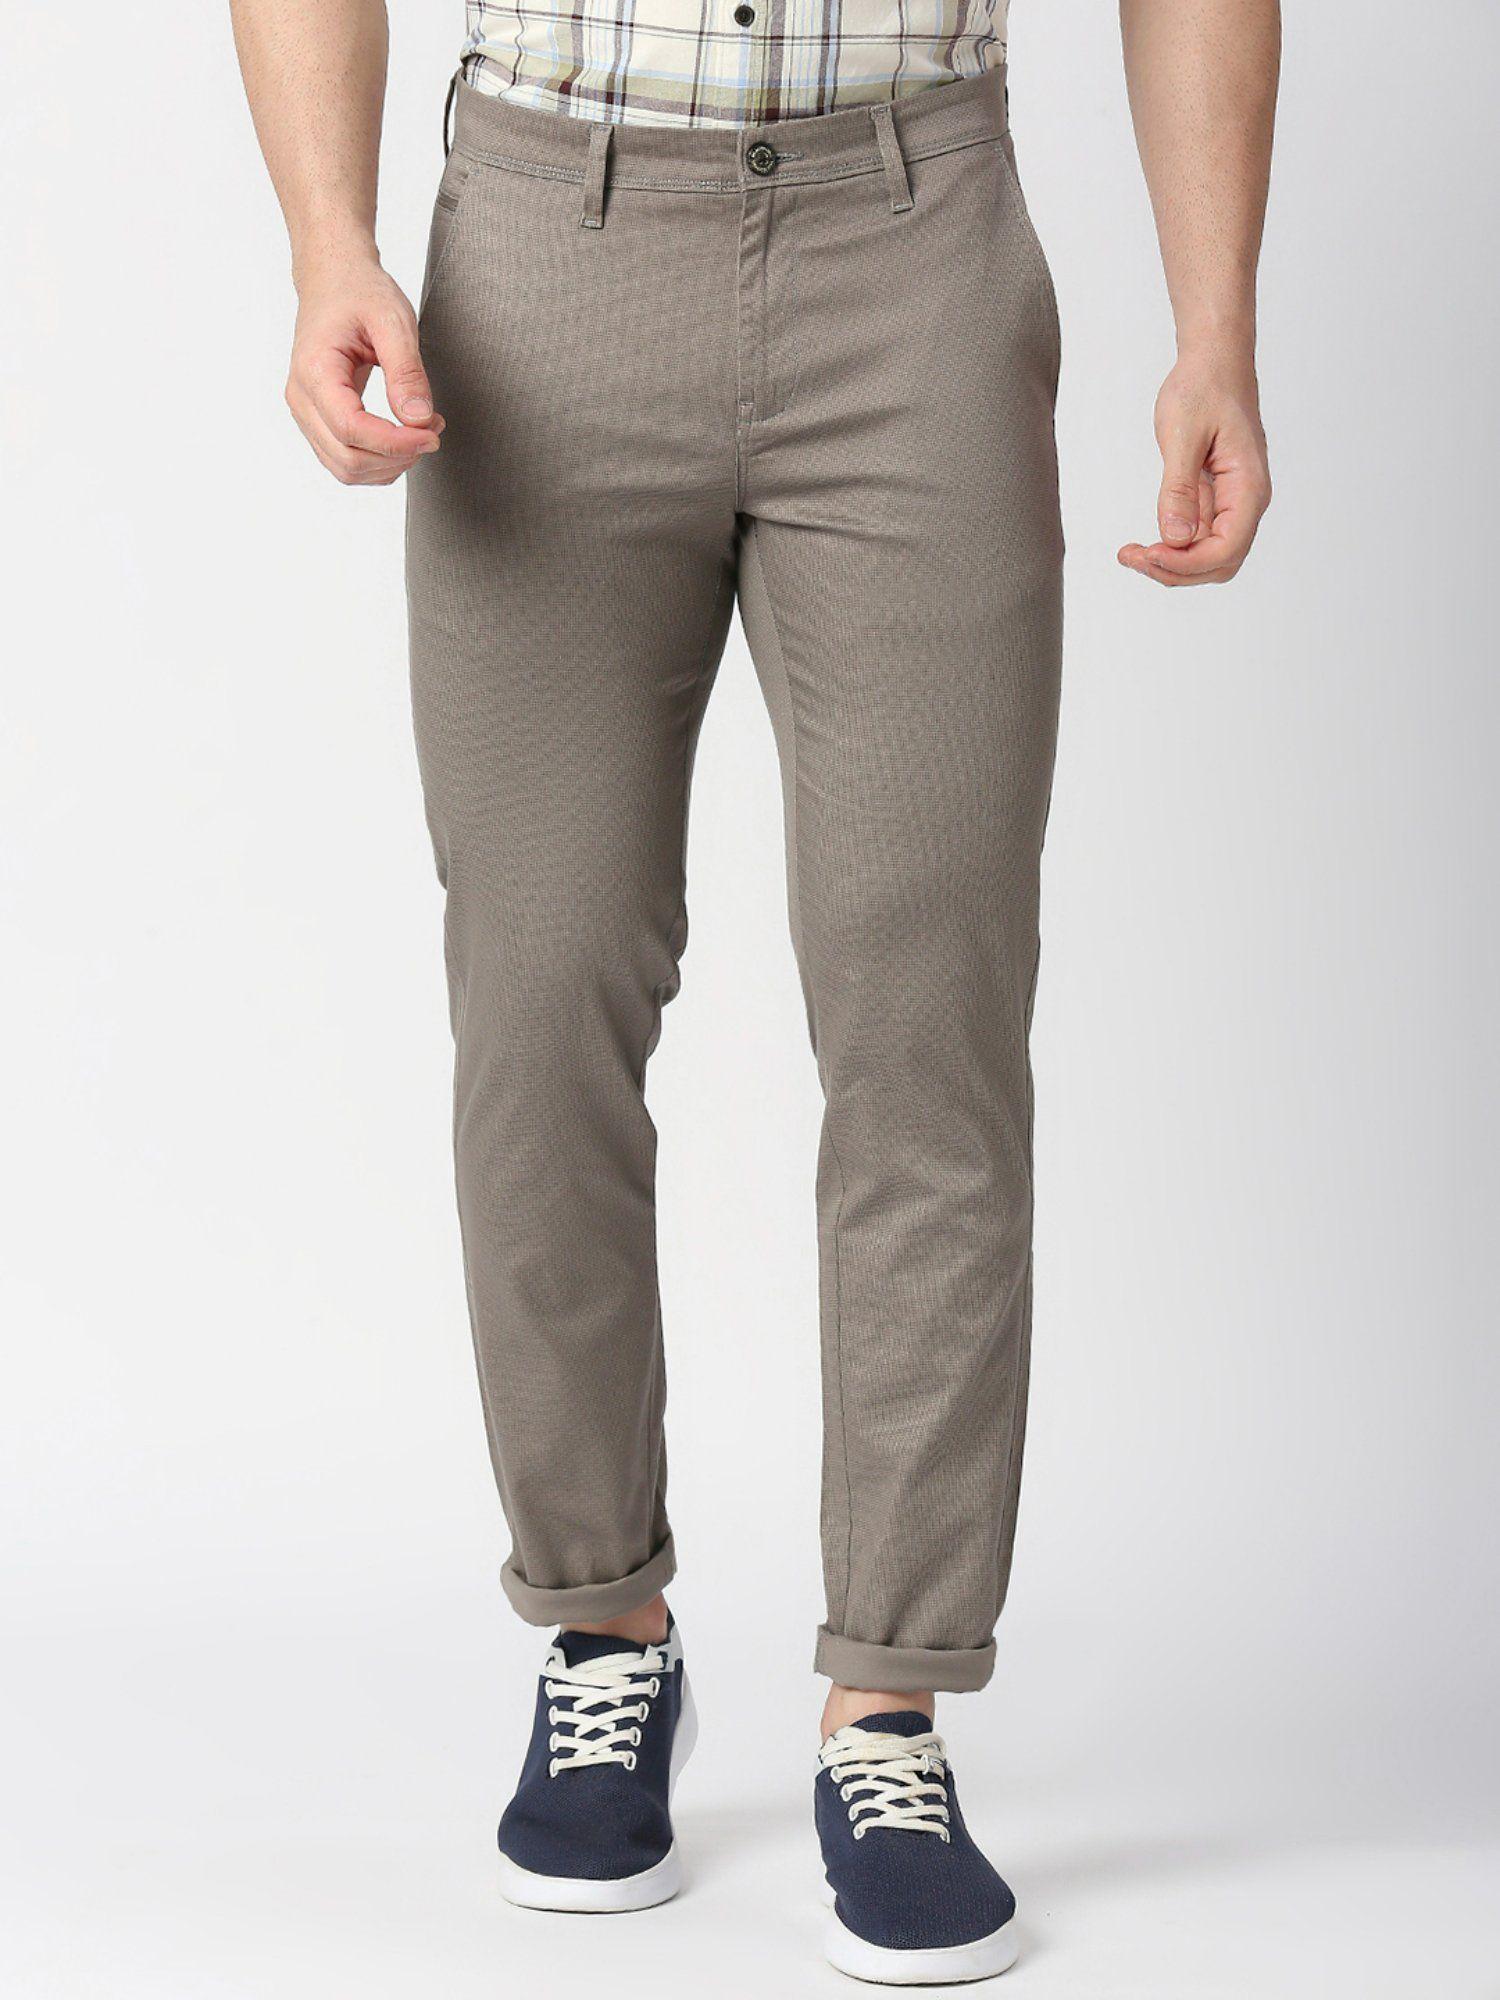 grey-slim-tapered-cotton-stretch-trouser